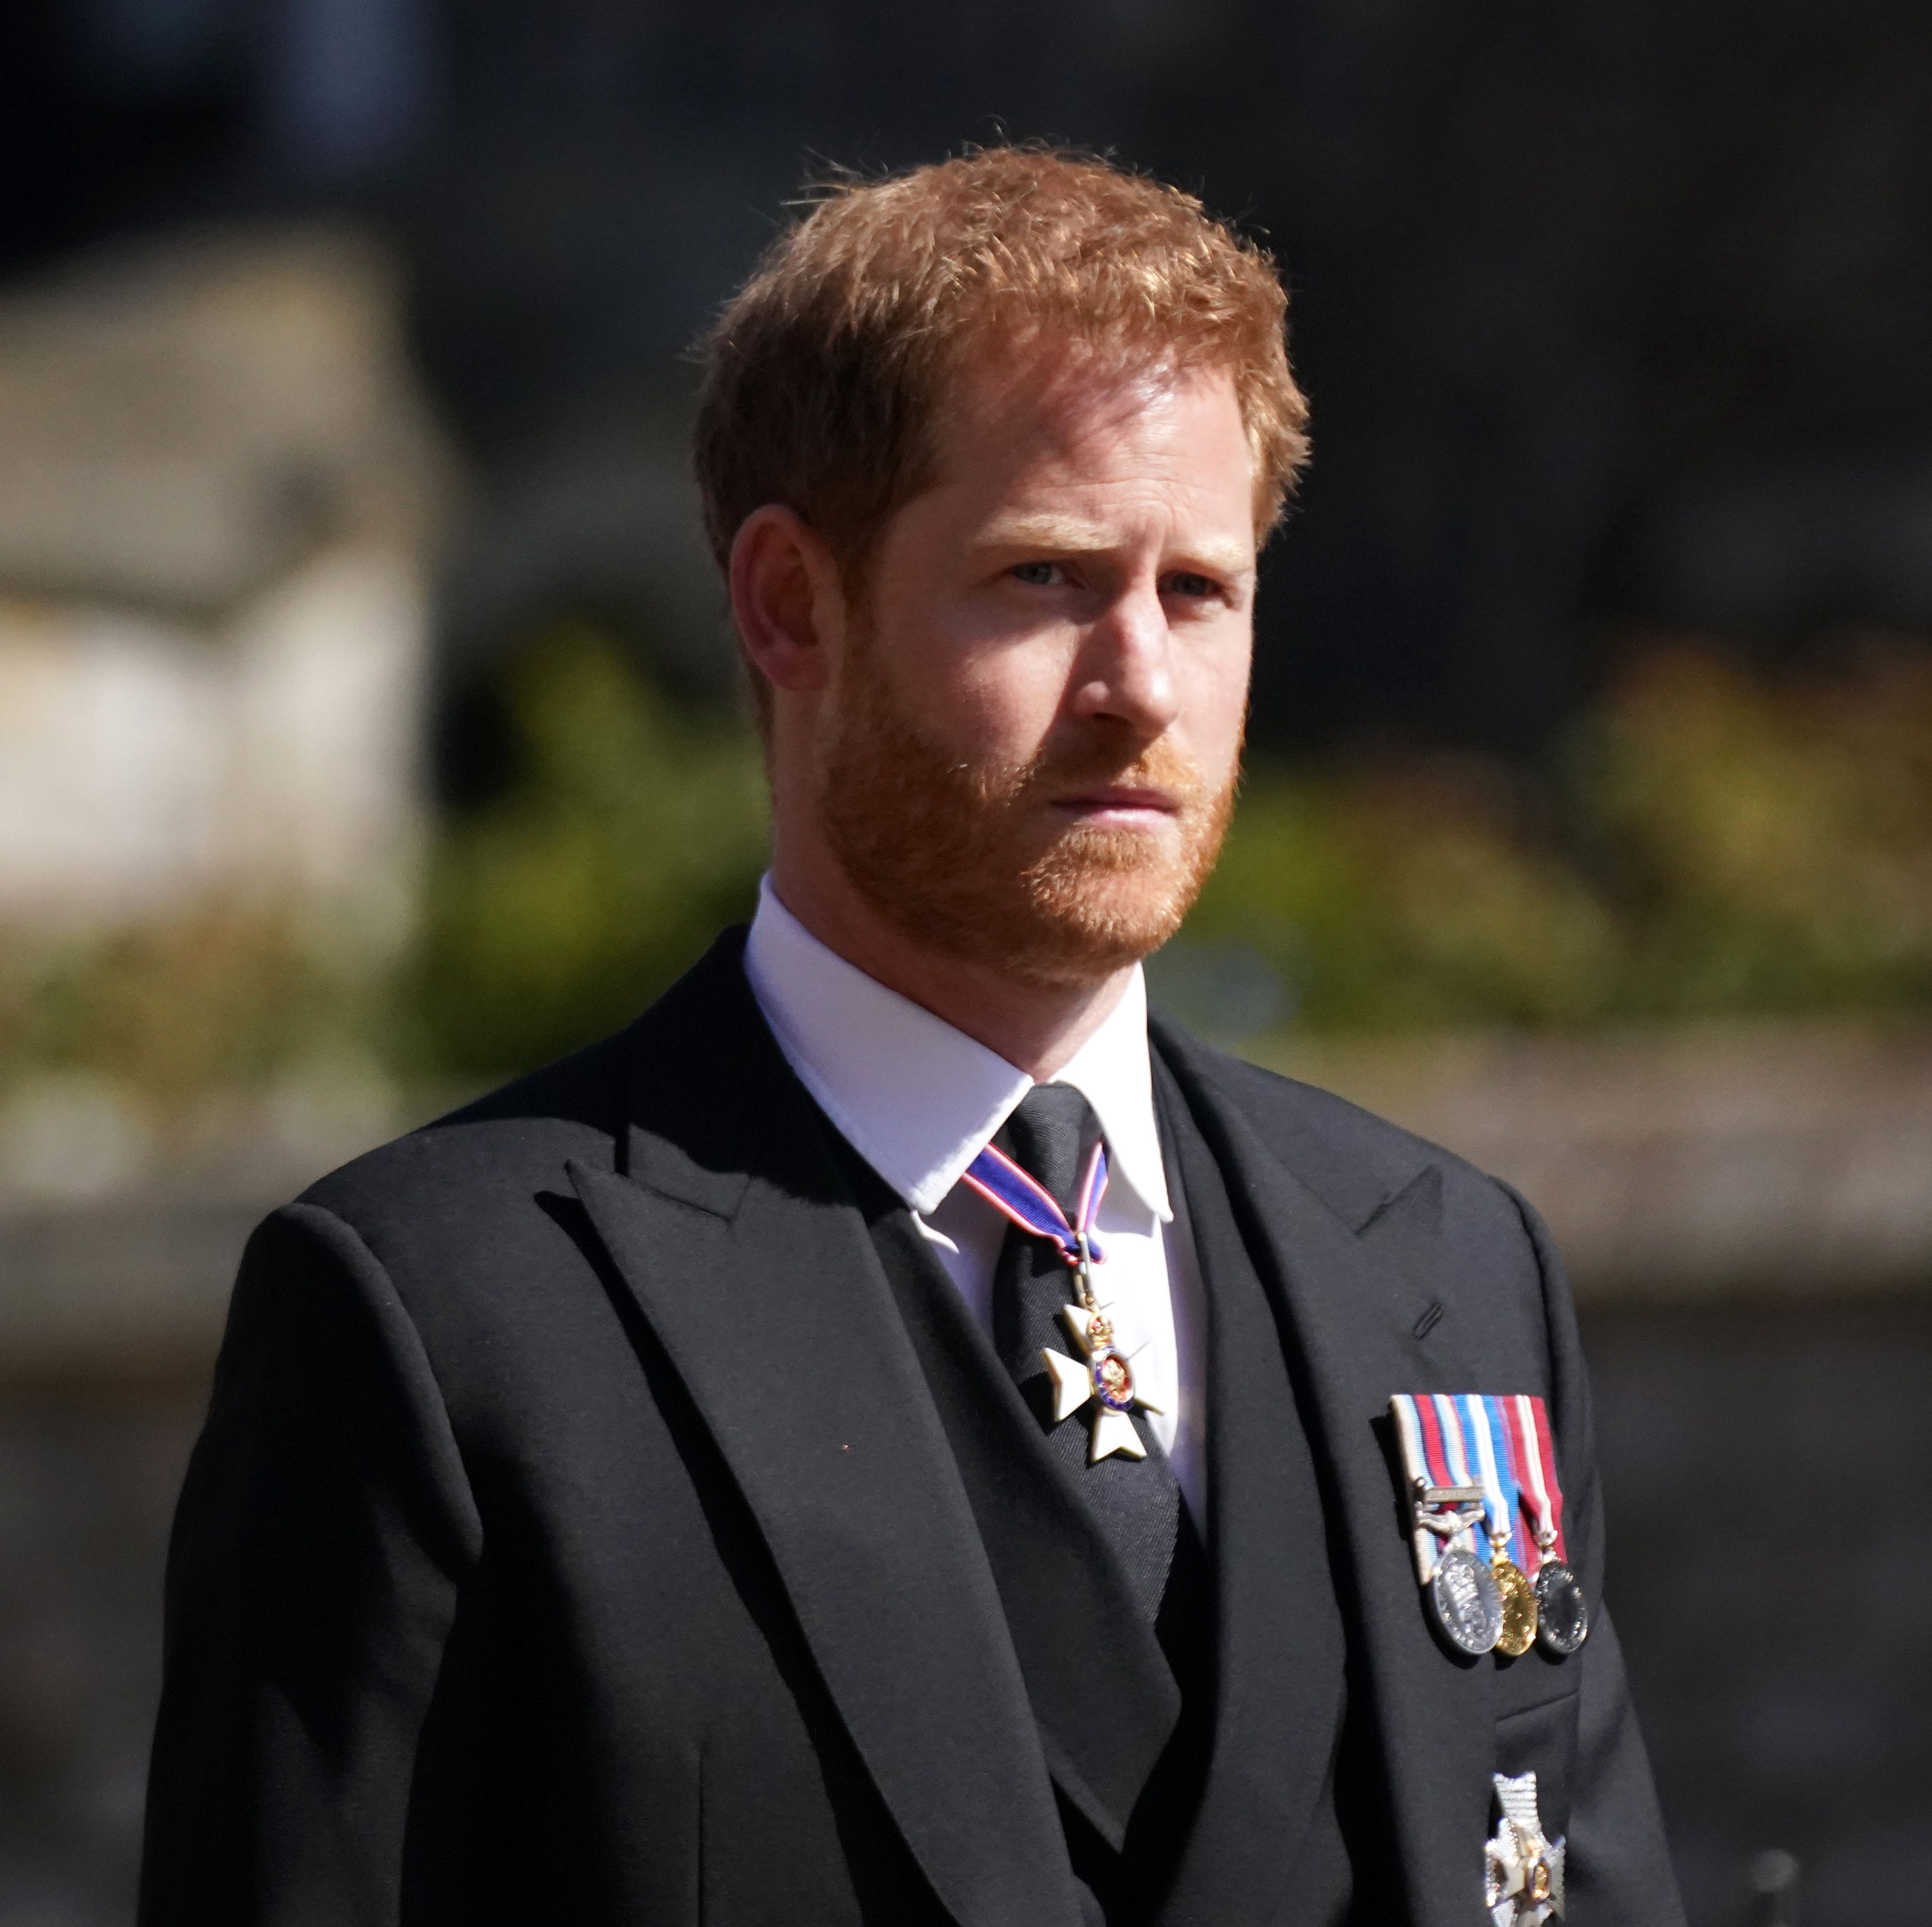 Prince Harry Has Changed His Plans and Will Stay in England Following the Queen's Death